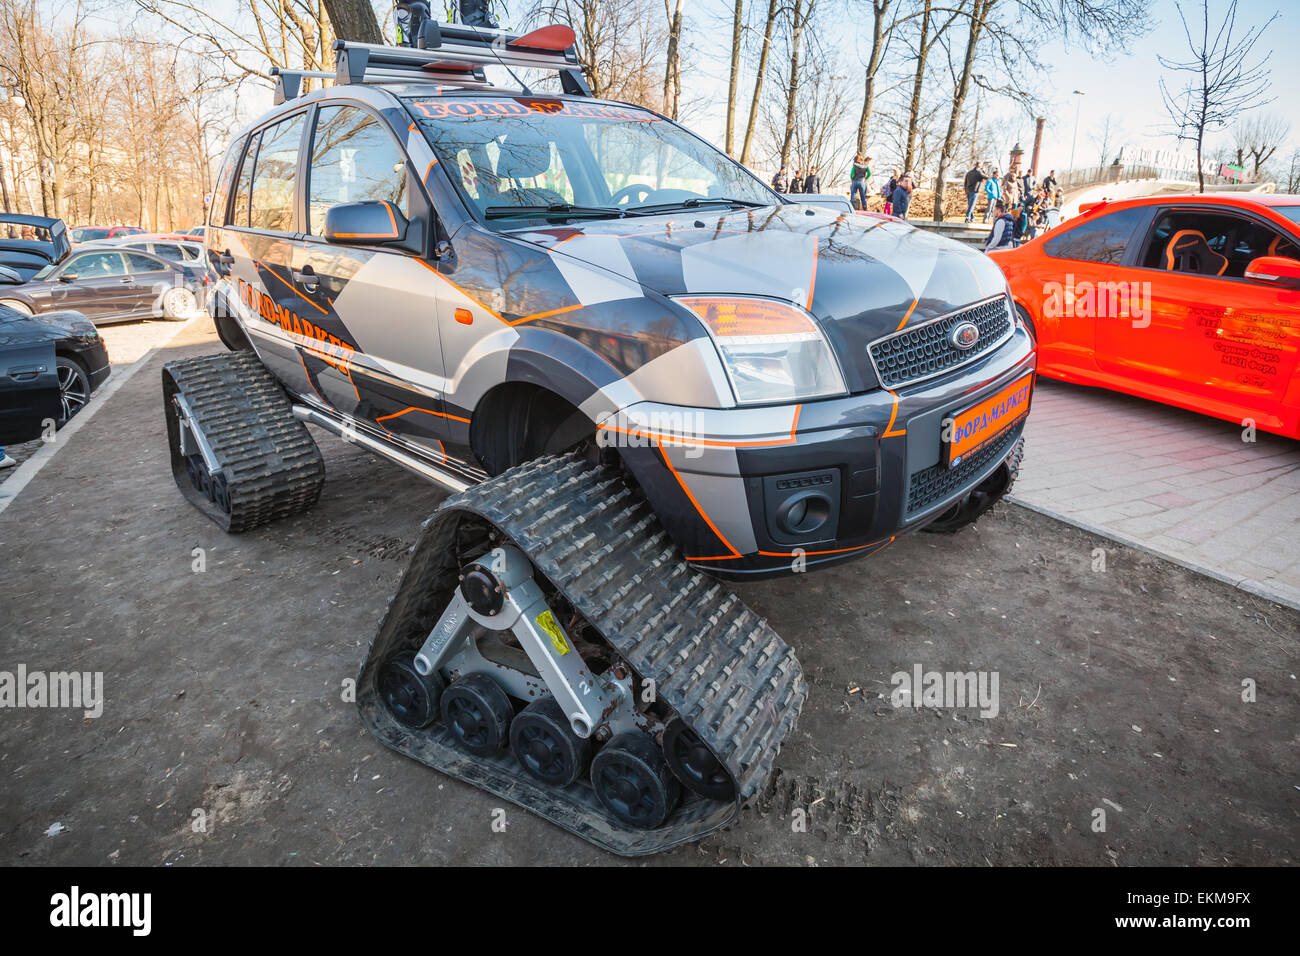 Saint-Petersburg, Russia - April 11, 2015: All-terrain cross-country vehicle on tracks based on European modification of Ford Stock Photo